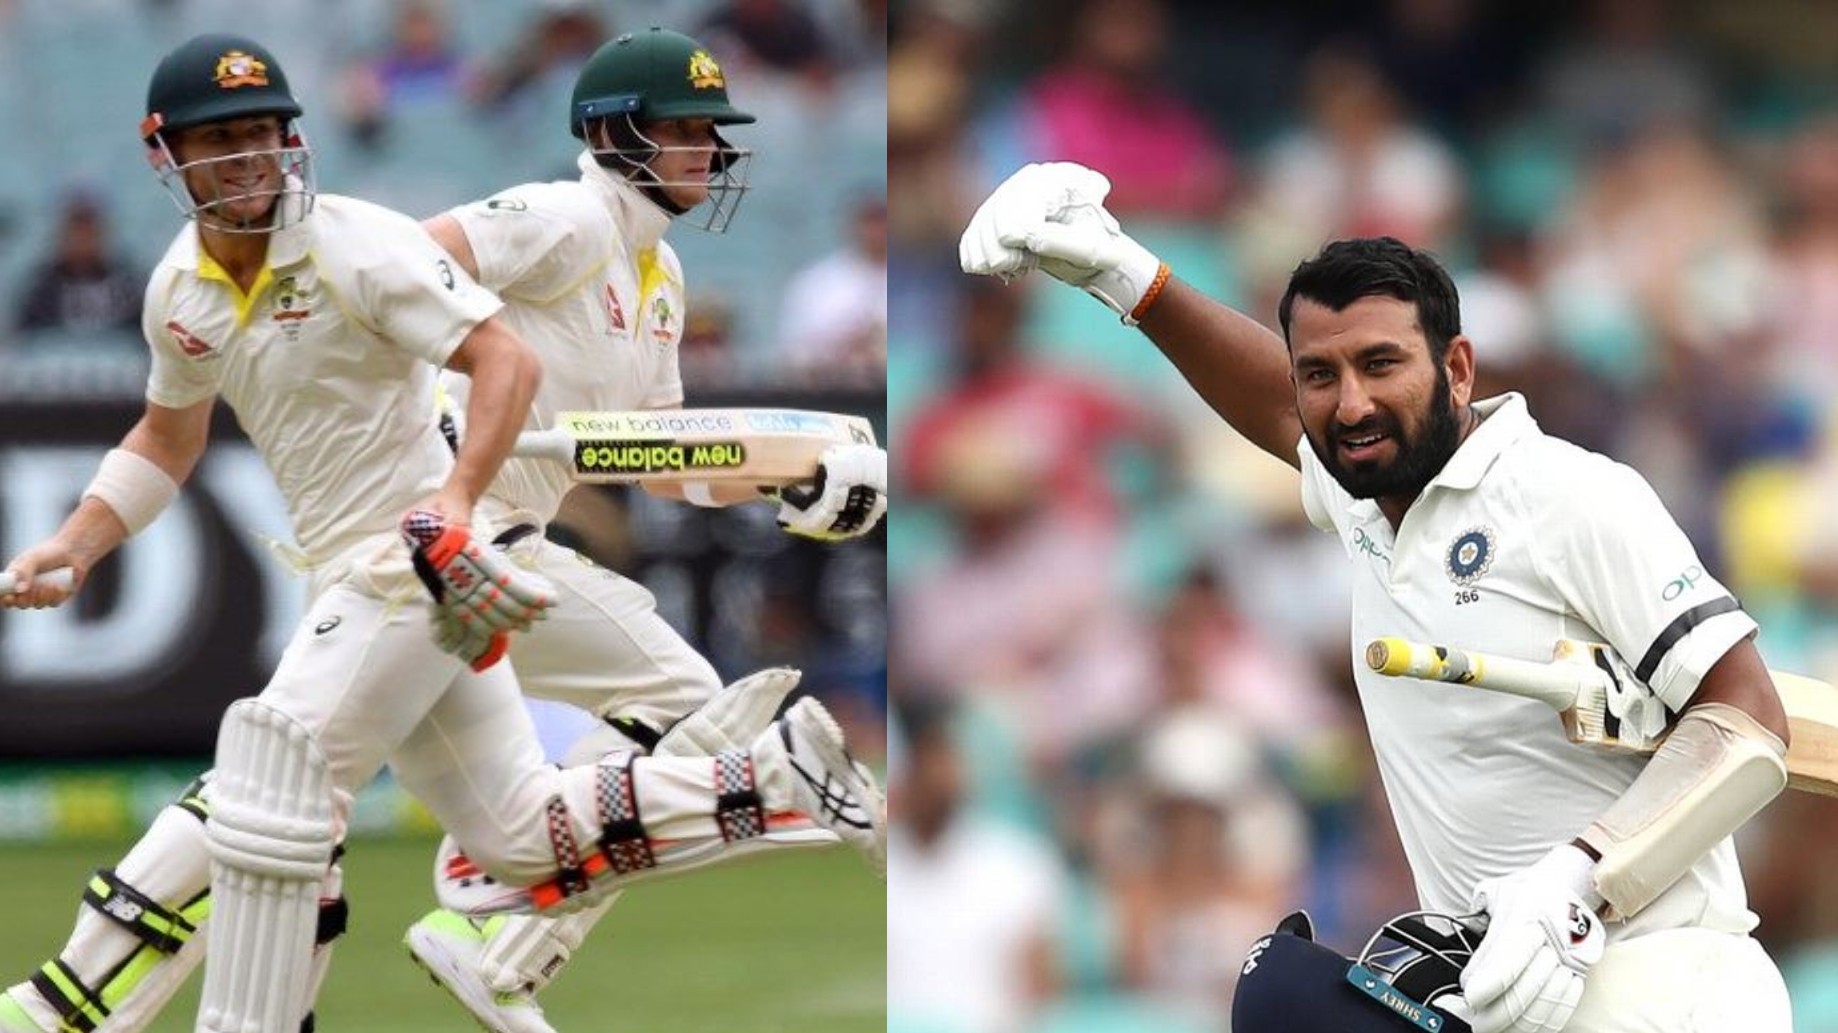 AUS v IND 2020-21: Pujara says team has faith in Indian bowlers to overcome Warner, Smith challenge